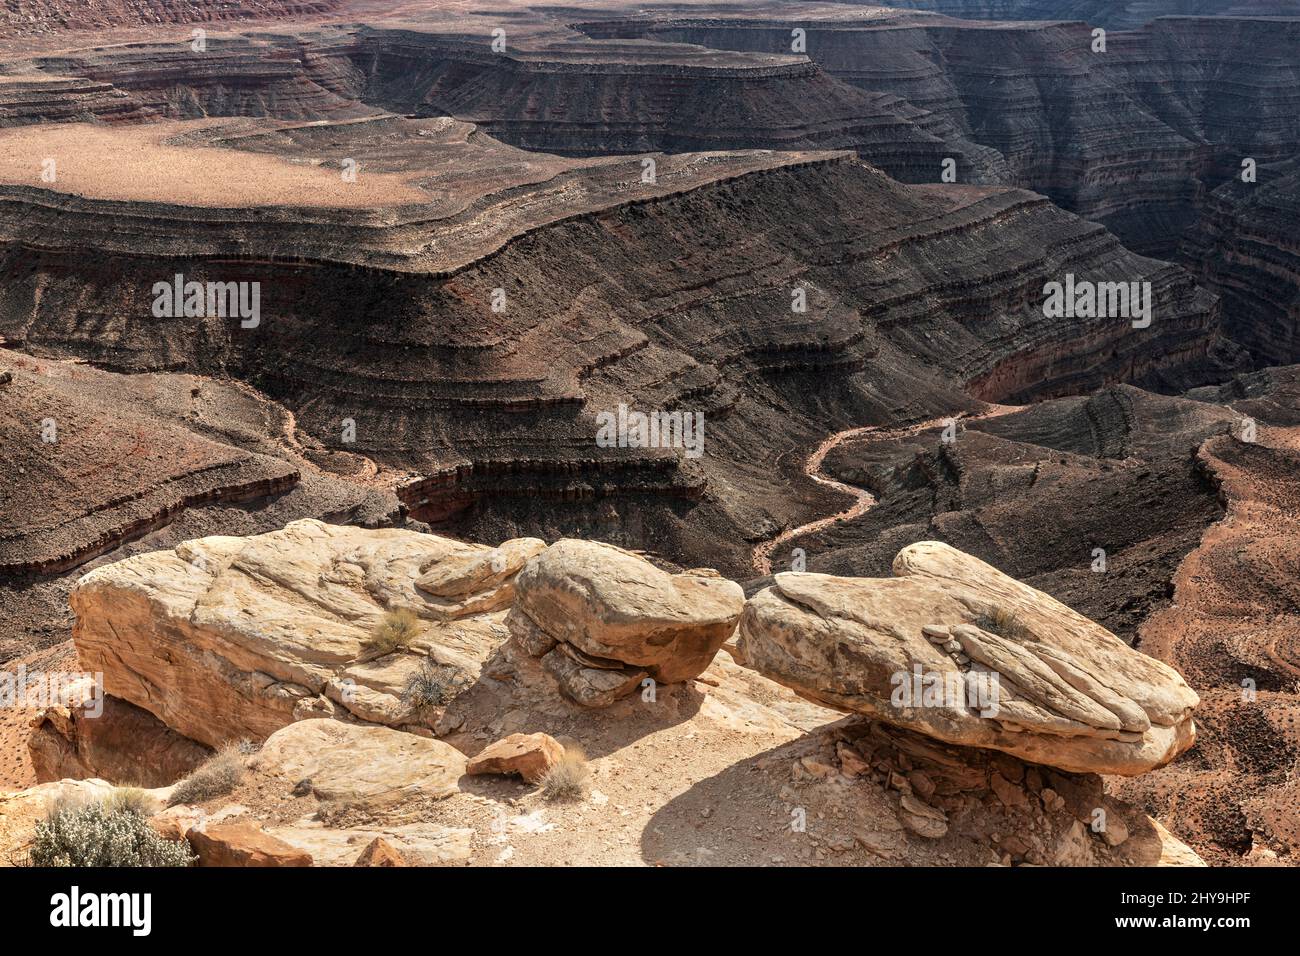 UT00898-00.....UTAH - Sandstone blocks with the San Juan River canyons below viewed from Muley Point in the Glen Canyon National Recreation Area. Stock Photo